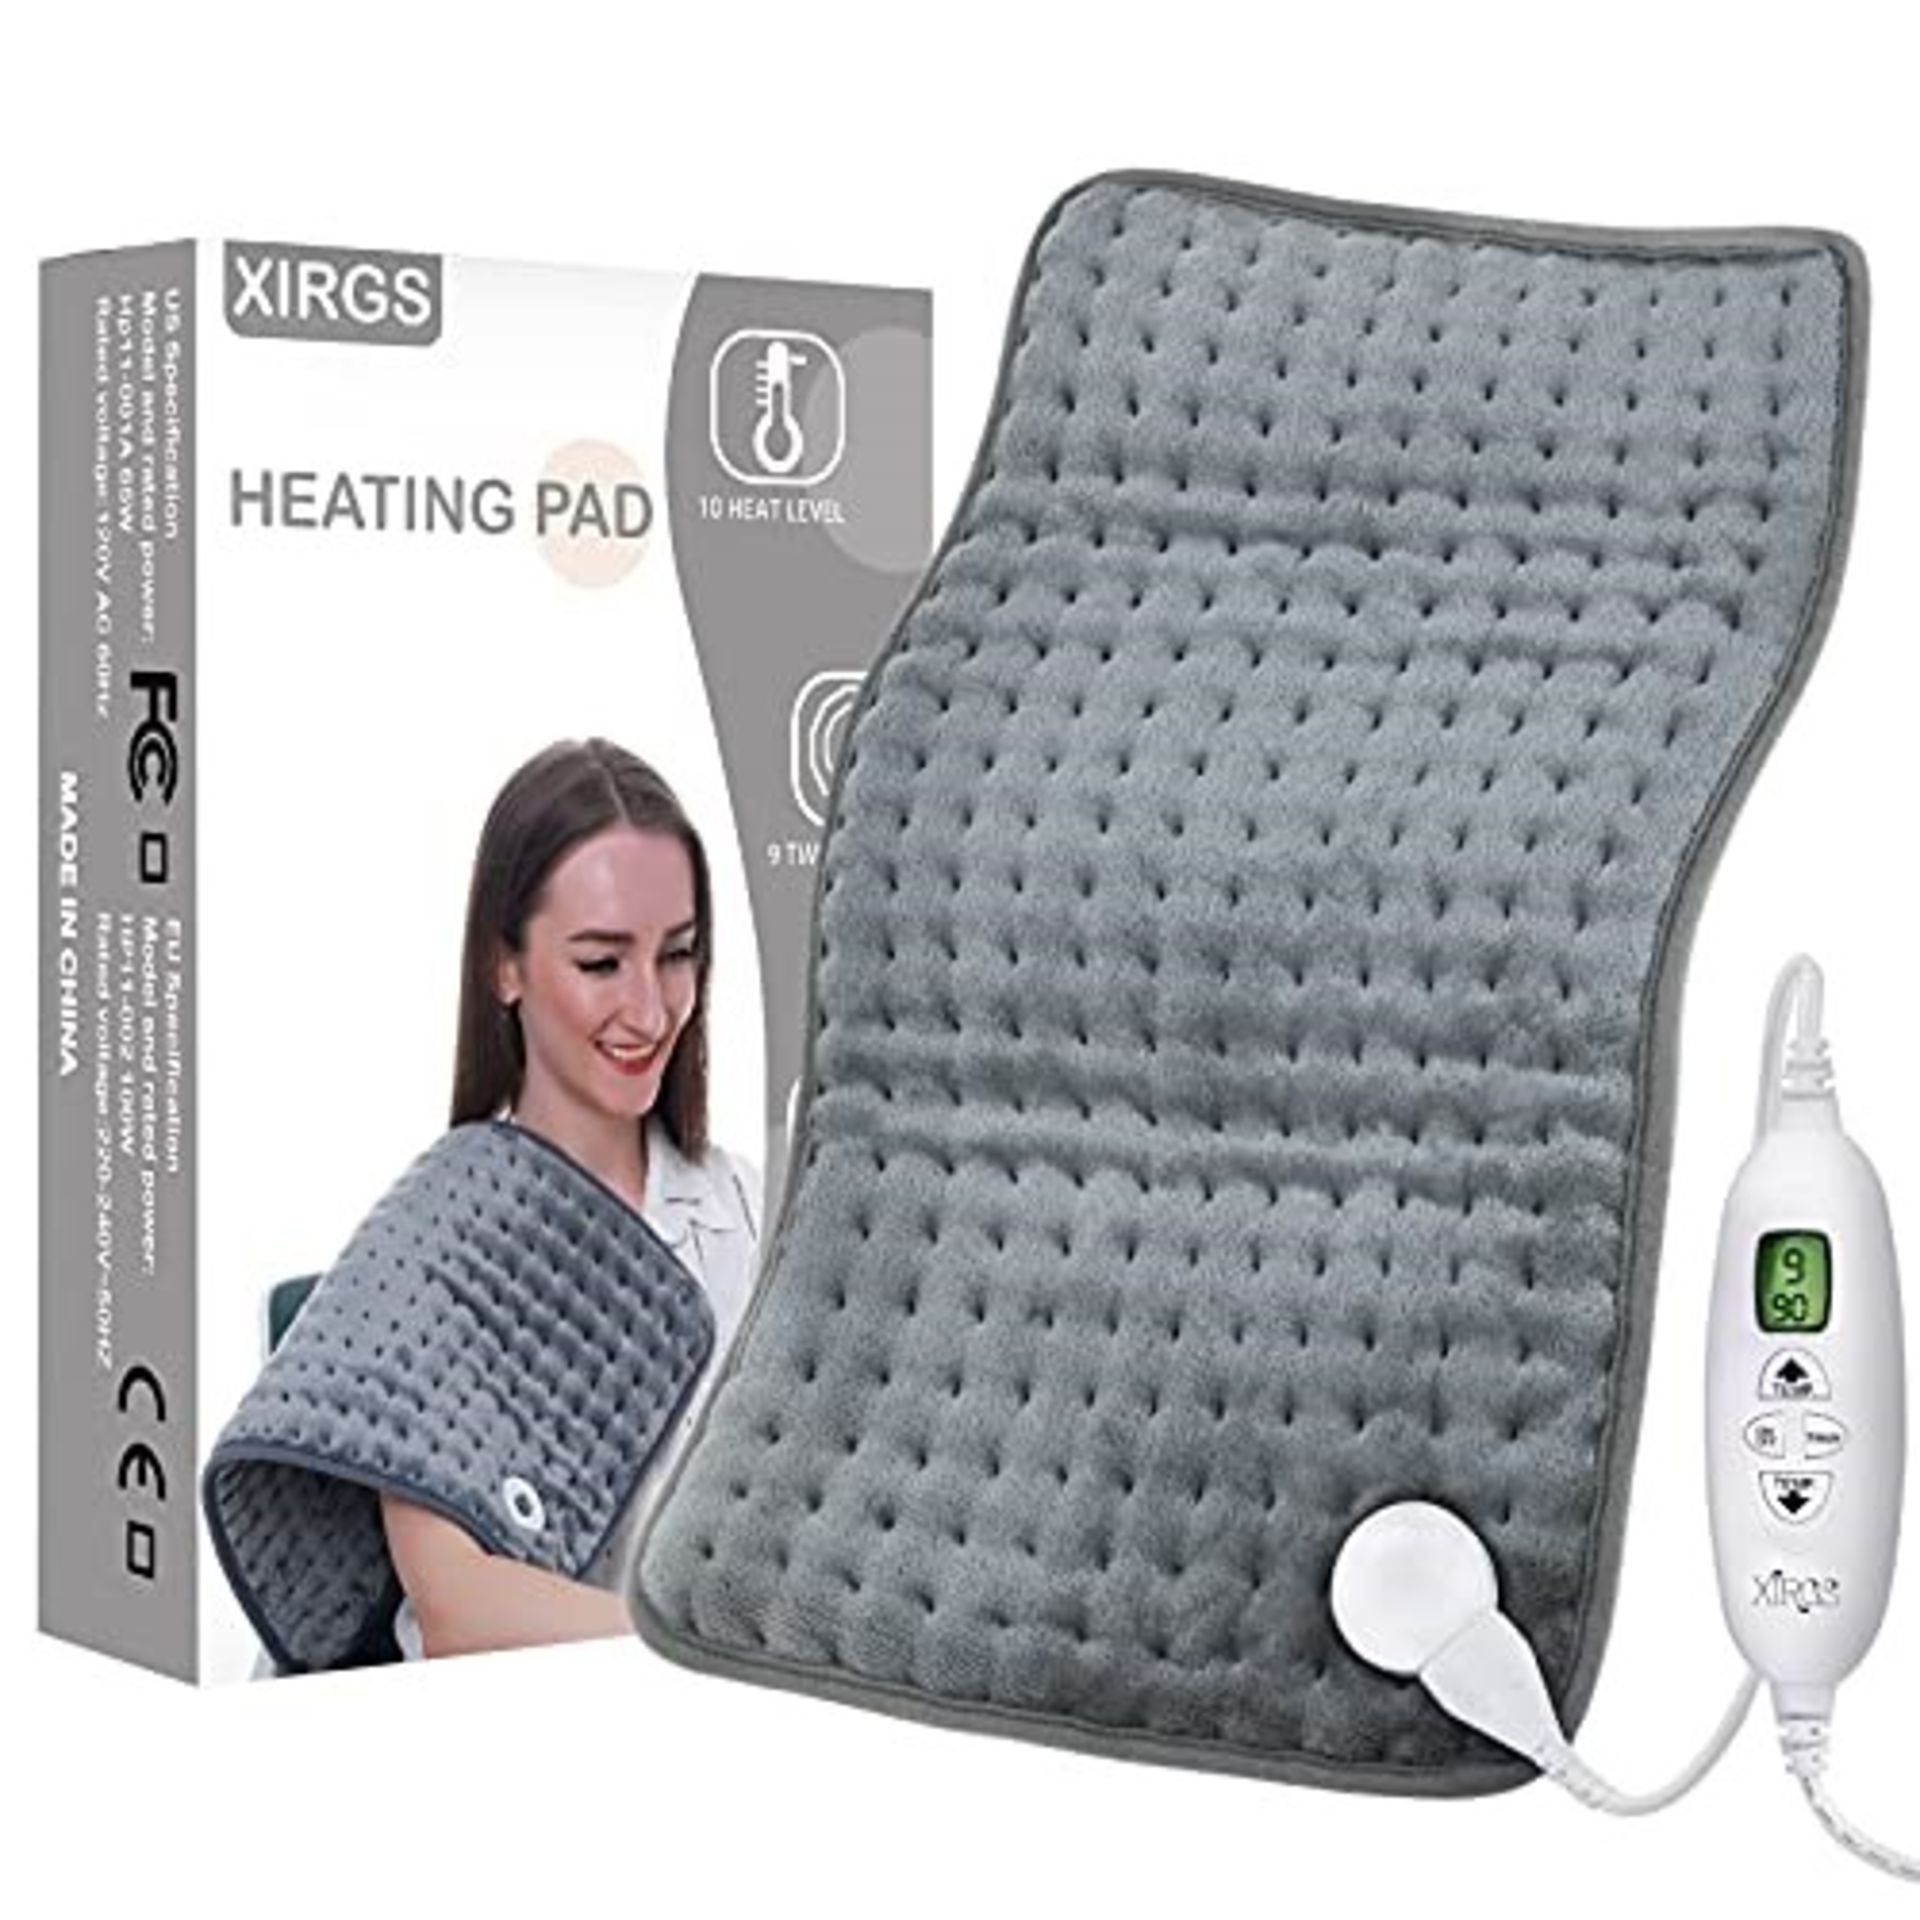 XIRGS Heating Pad, Electric Heating Pad for Back Cramps Neck Pain Relief, Dry & Moist